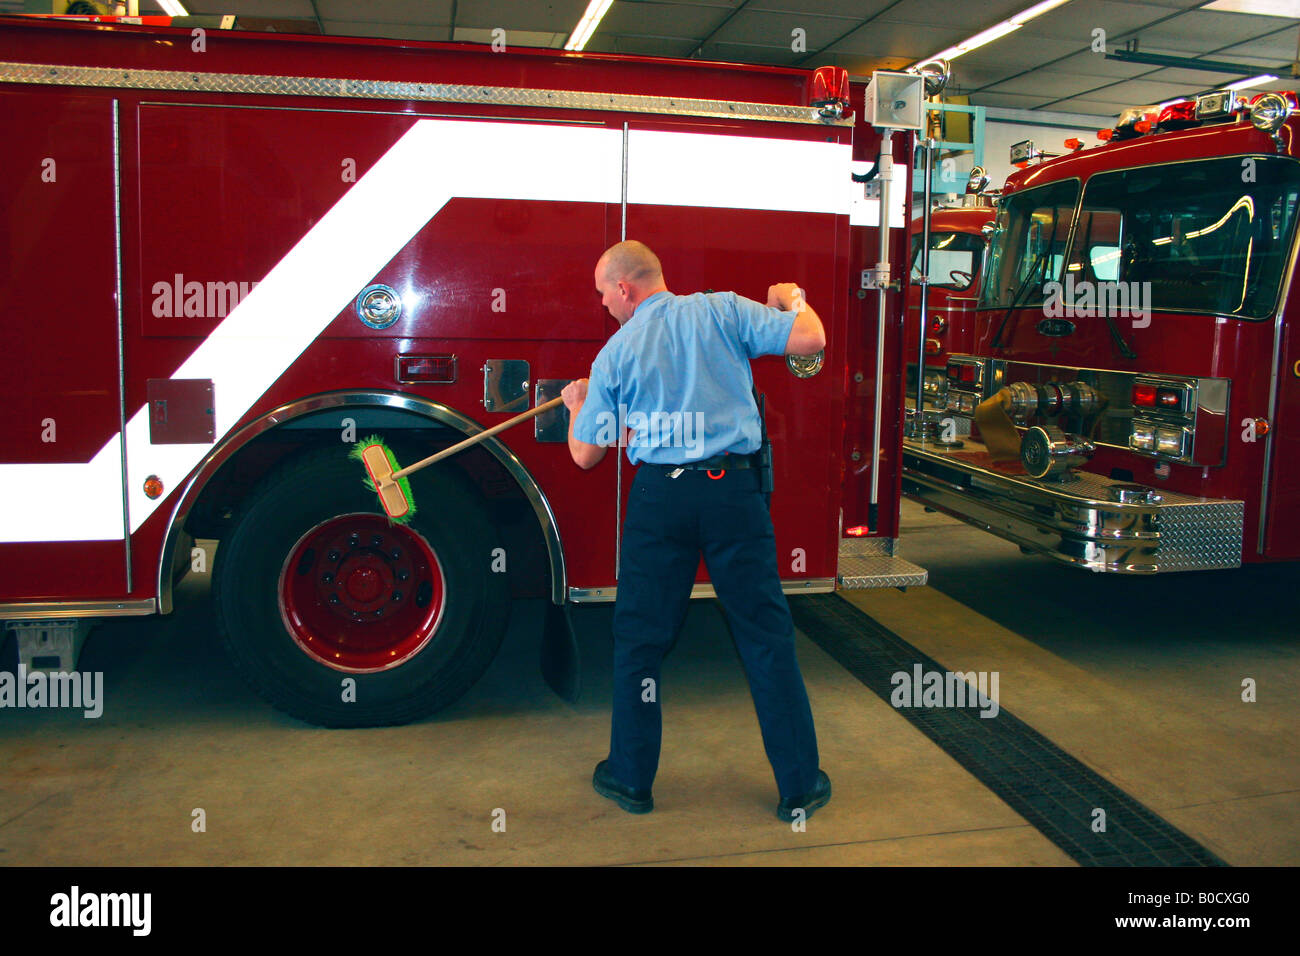 Firefighter cleaning tires on Fire Engine Stock Photo